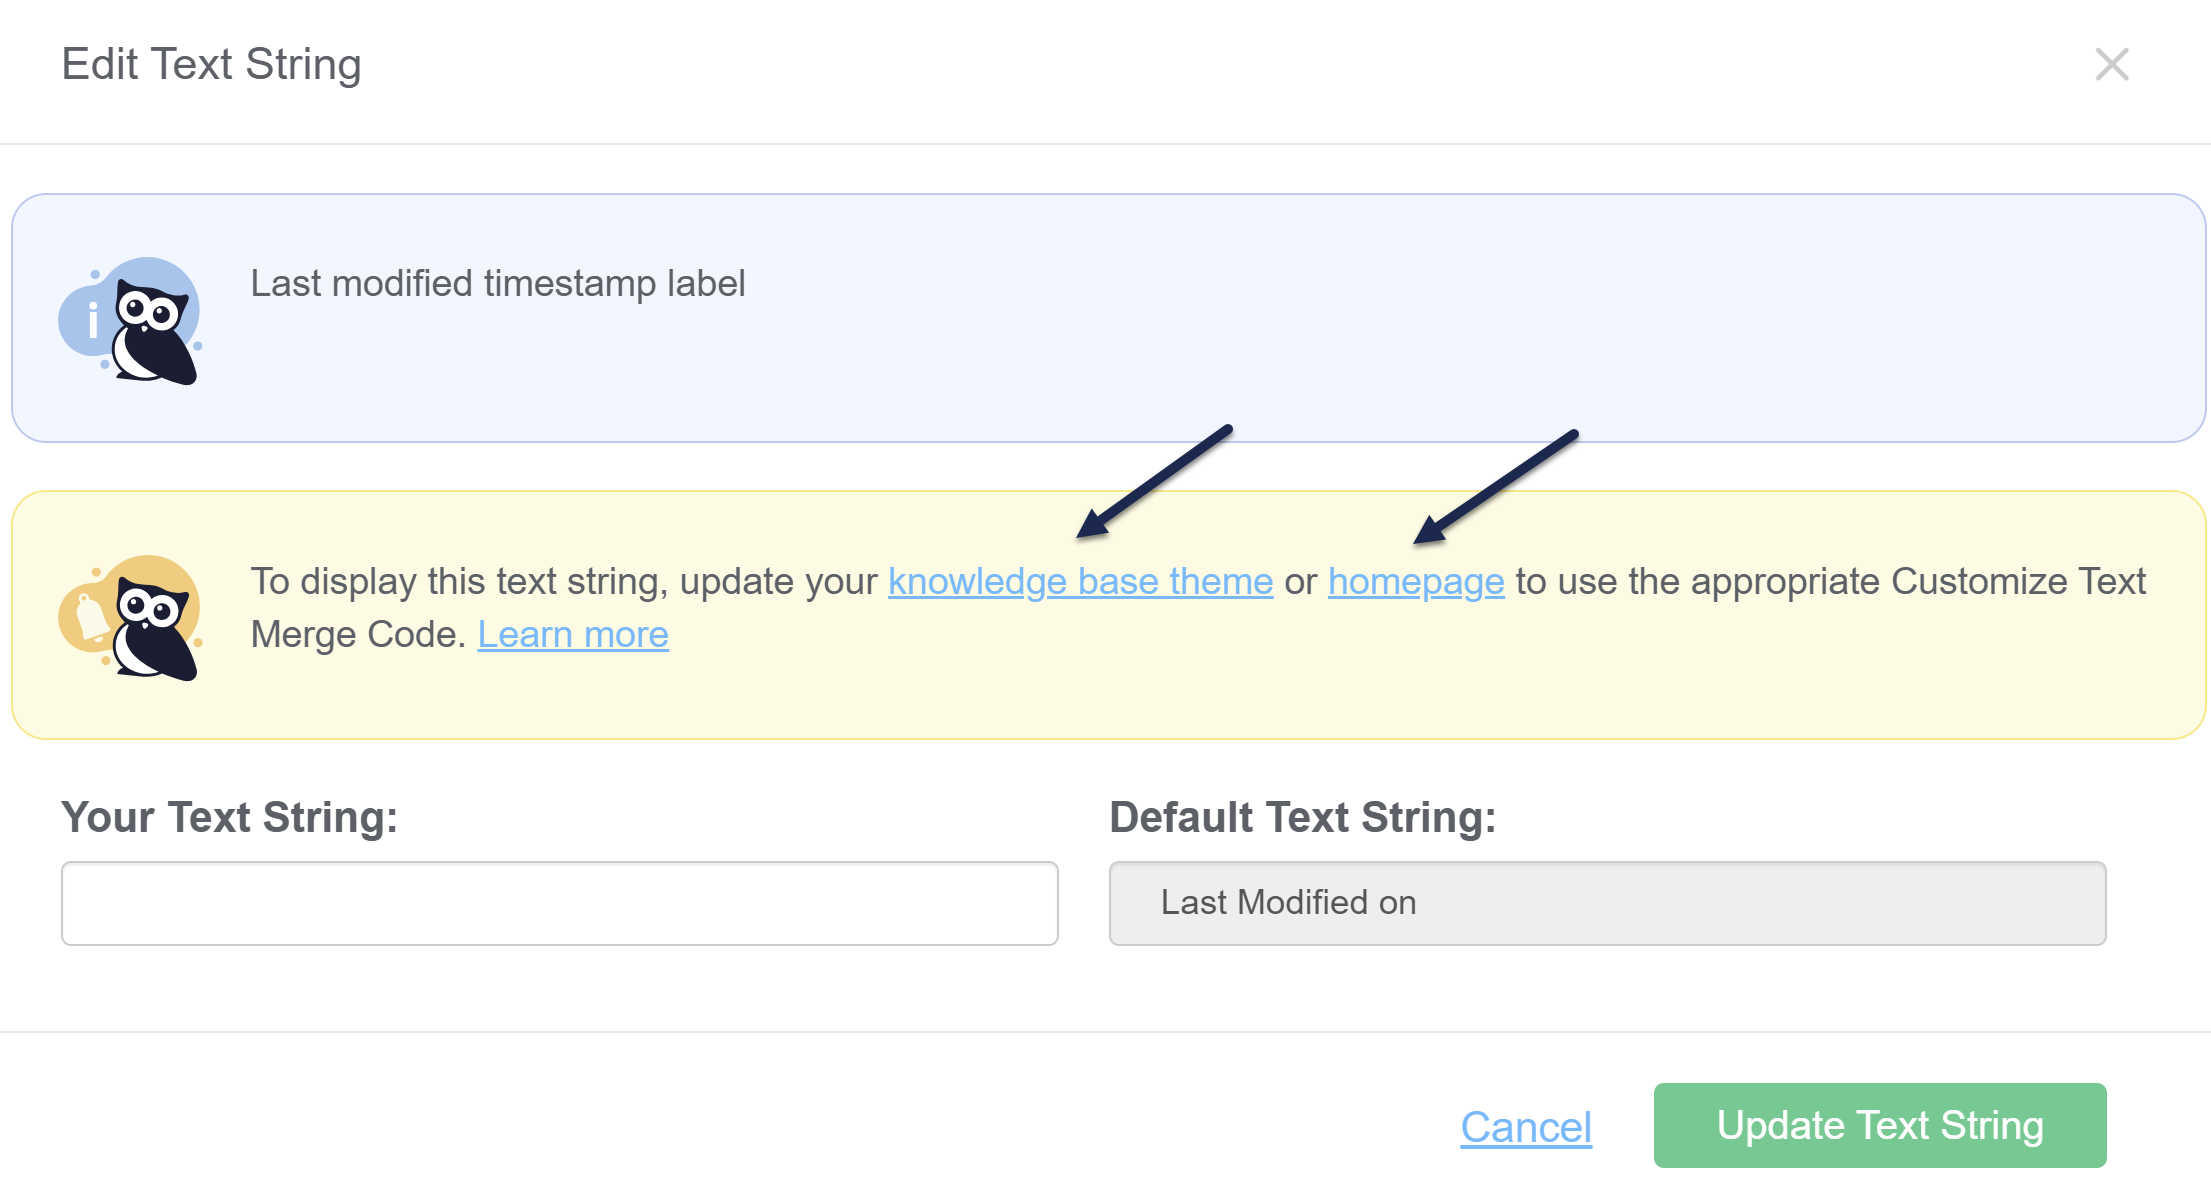 An Edit Text String pop-up for the Last modified timestamp label text string. A warning message is displayed that says "To display this text string, update your knowledge base theme or homepage to use the appropriate Customize Text Merge Code. Learn more".